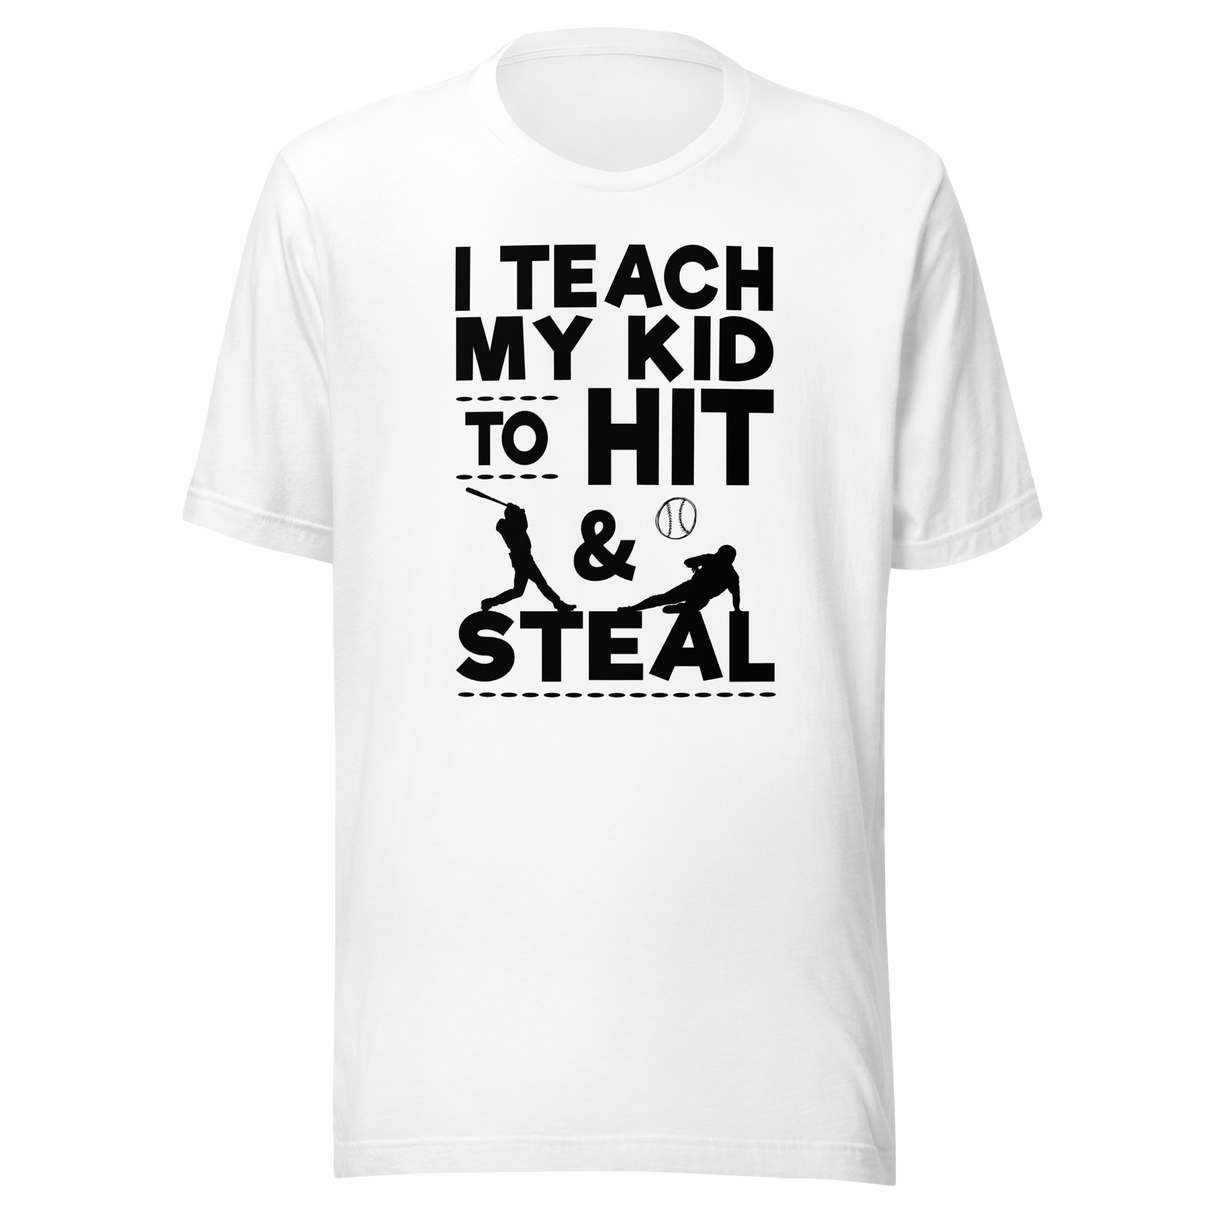 i-teach-my-kid-to-hit-and-steal-sports-tee-baseball-t-shirt-parenting-tee-humor-t-shirt-coaching-tee#color_white